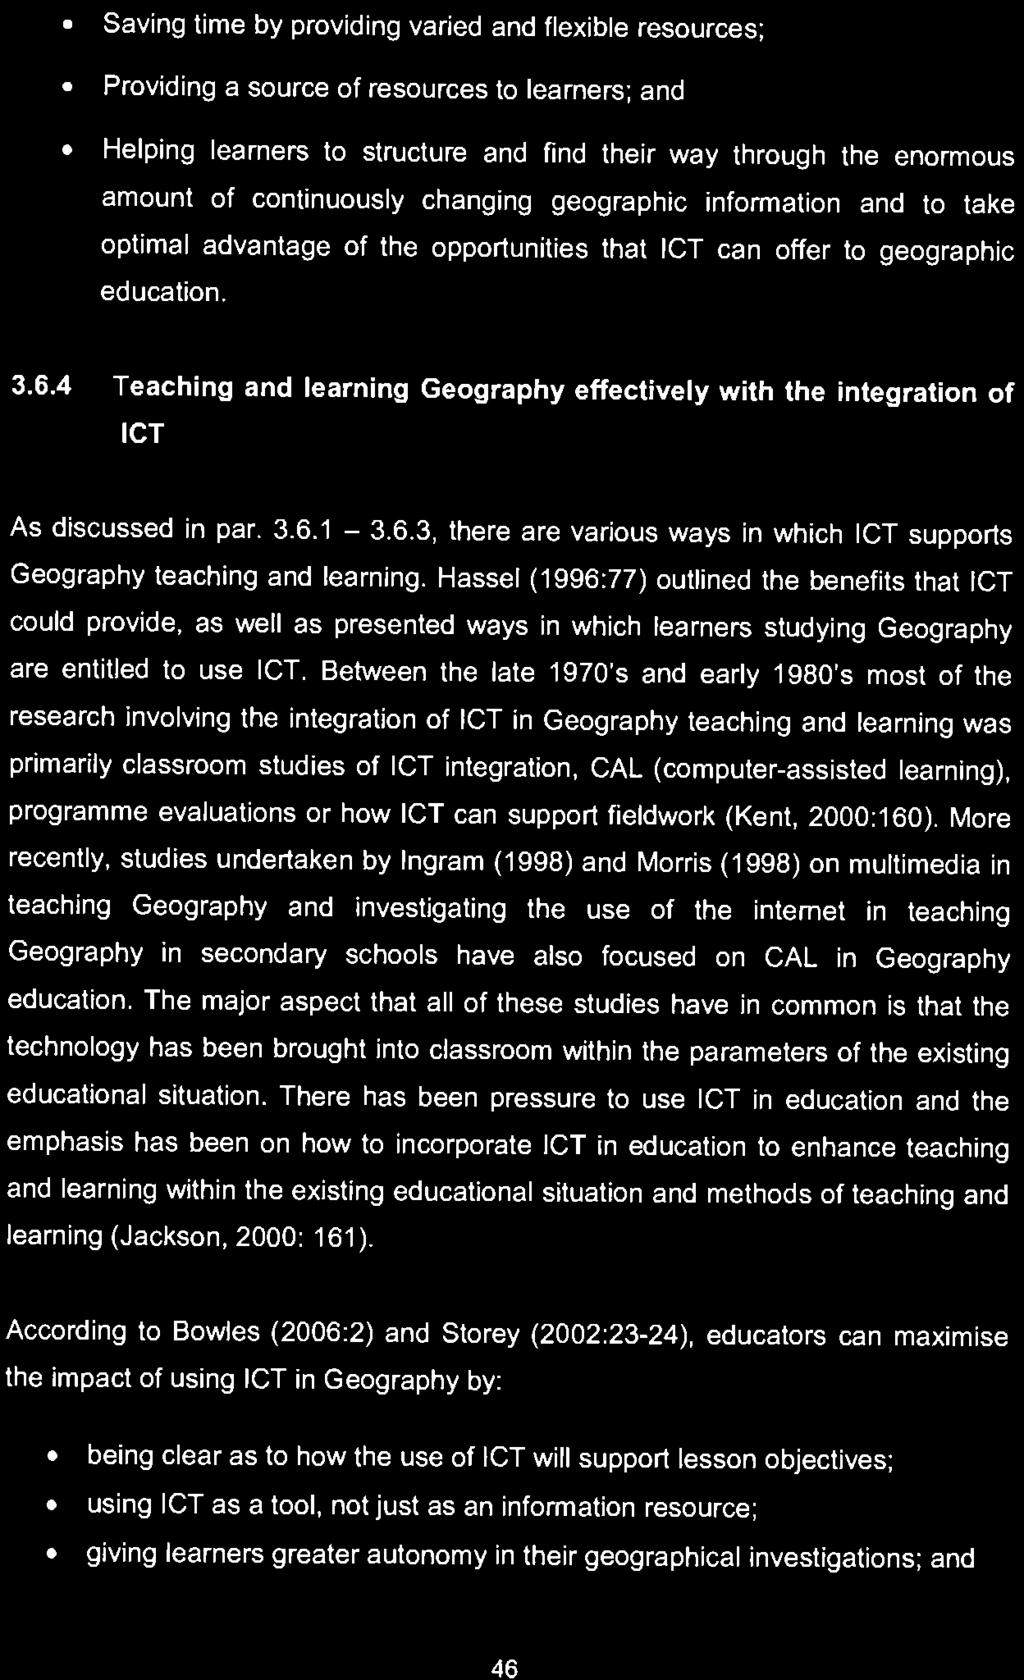 Teaching and learning Geography effectively with the integration of ICT As discussed in par. 3.6.1-3.6.3, there are various ways in which ICT supports Geography teaching and learning.